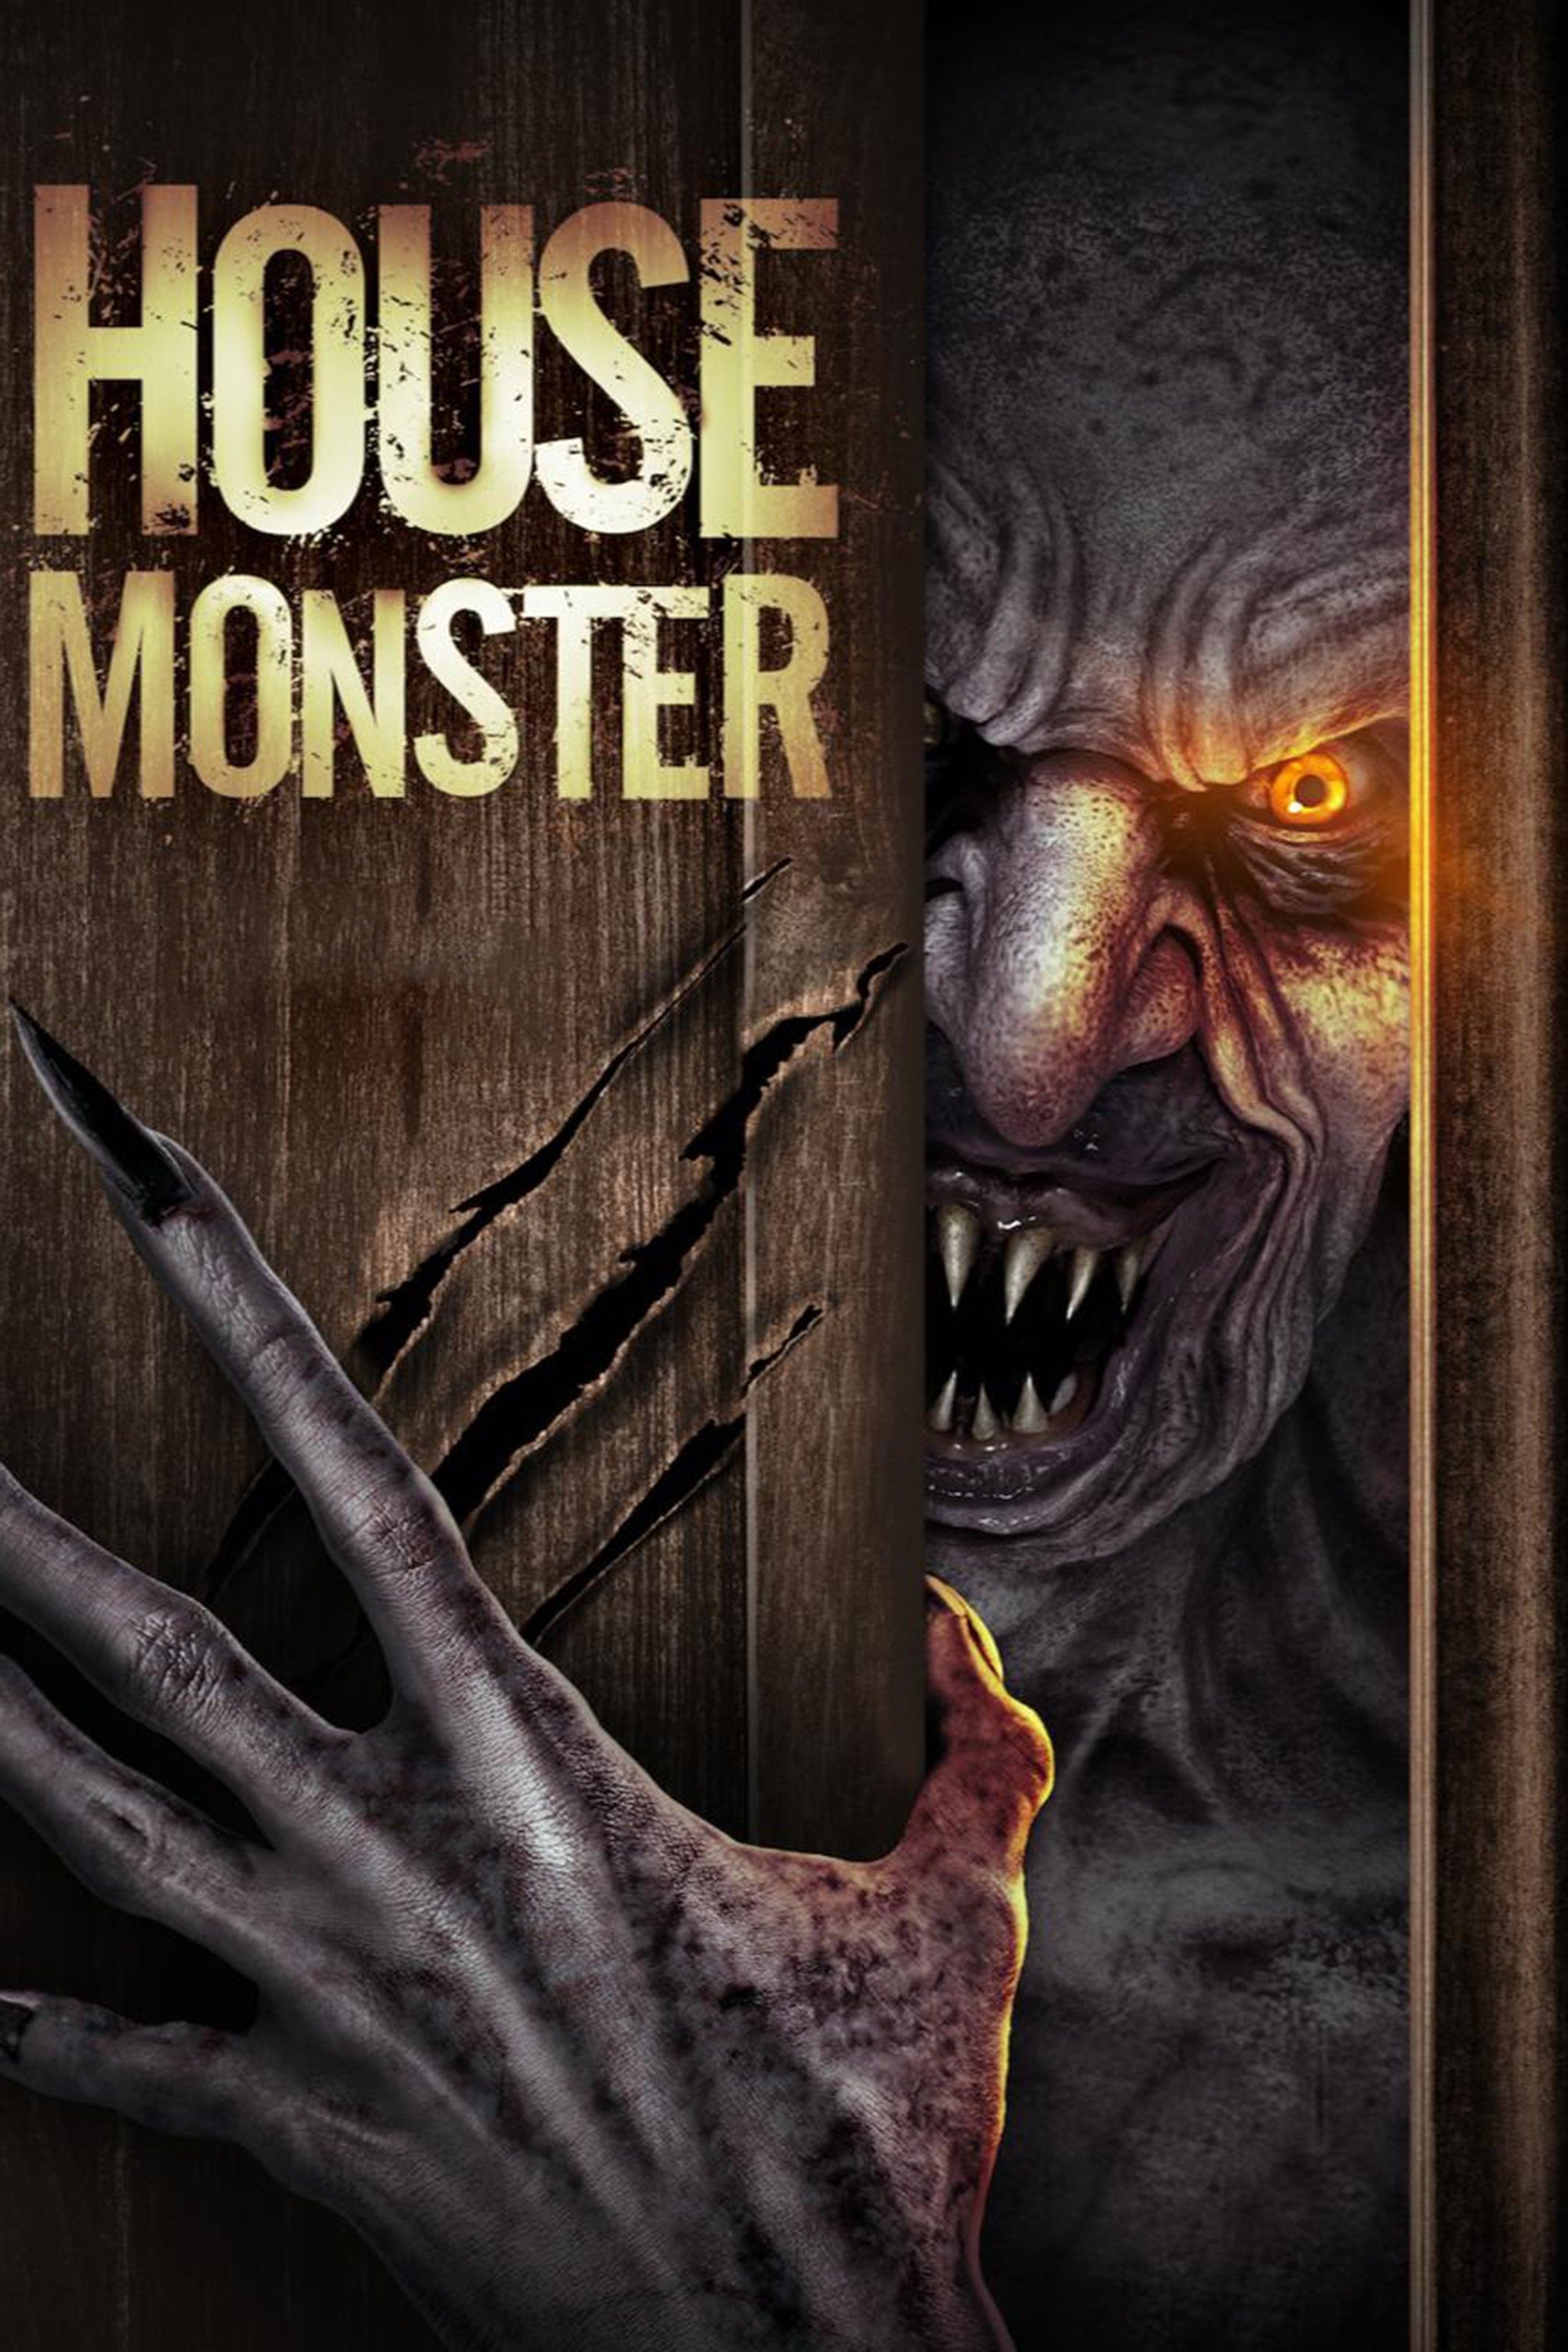 House Monster Pictures Rotten Tomatoes